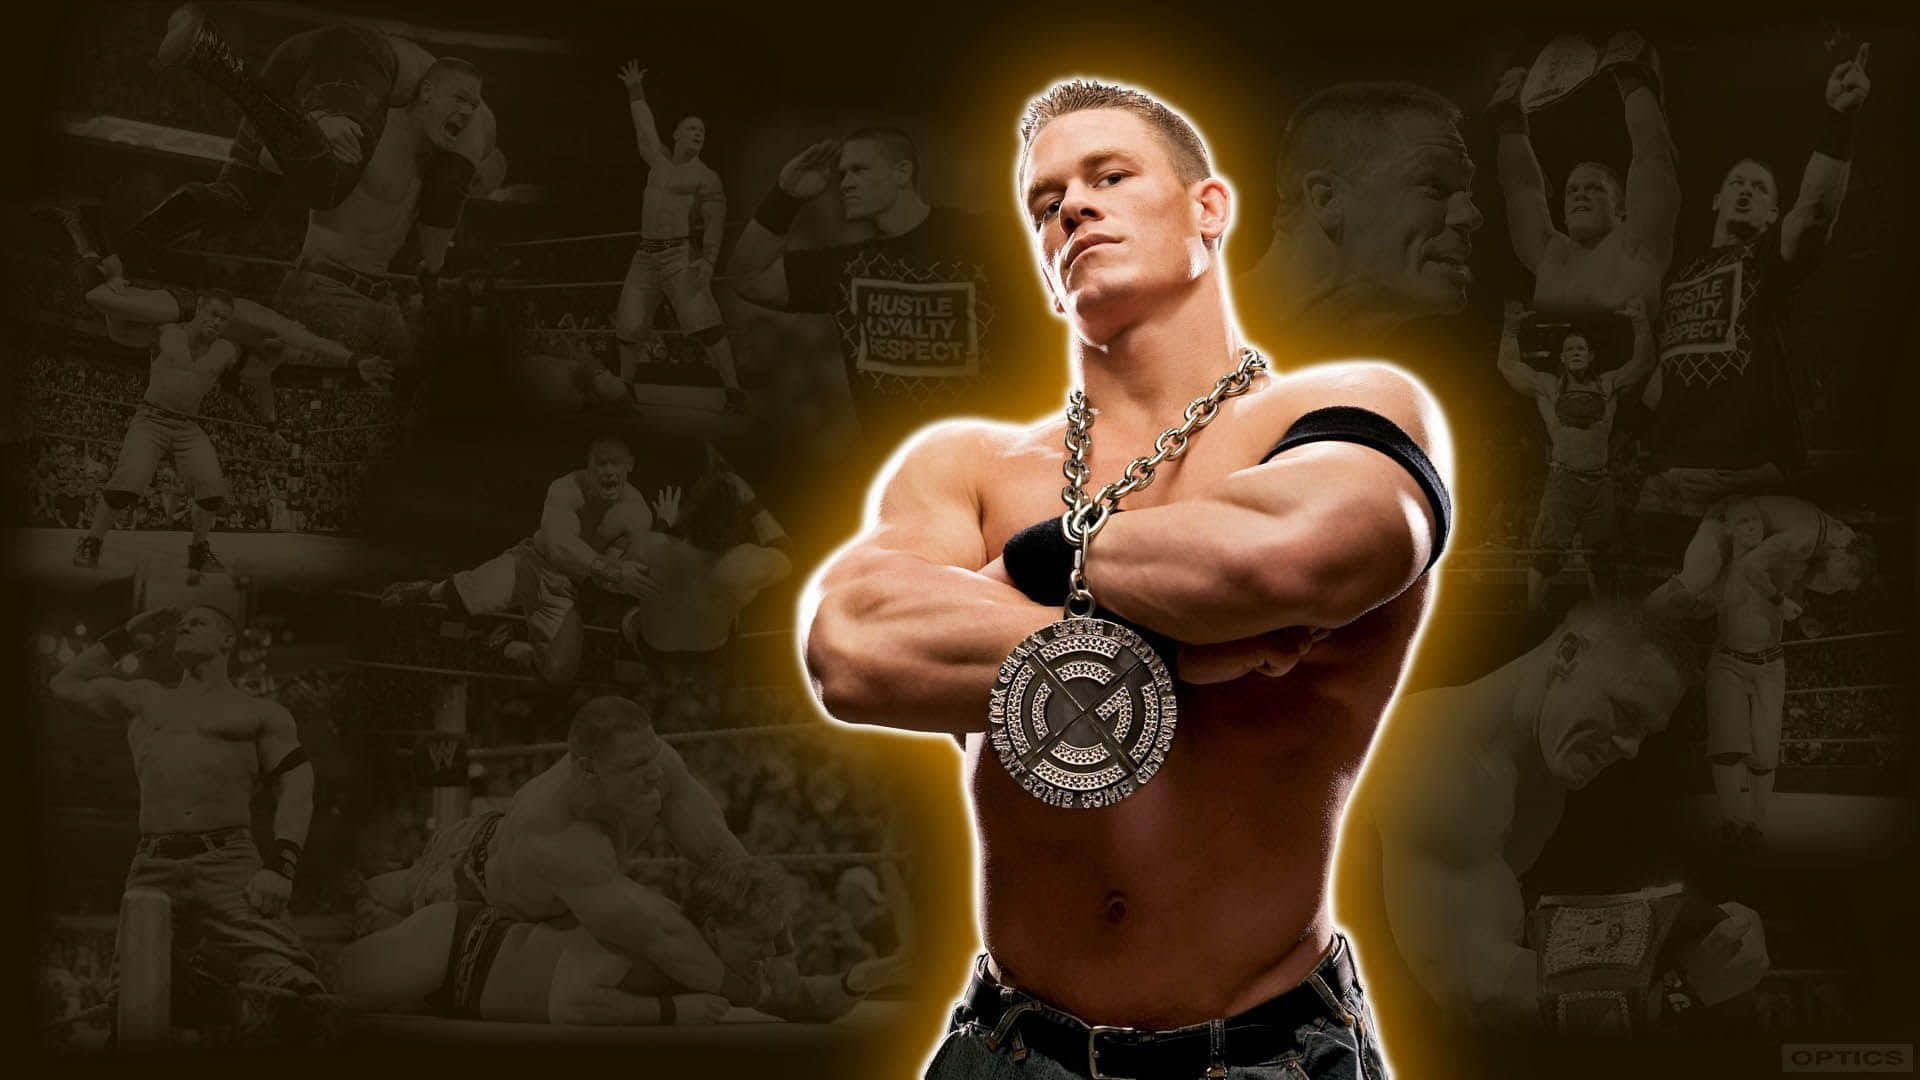 Cool Wwe Cena With Crossed Arms Wallpaper